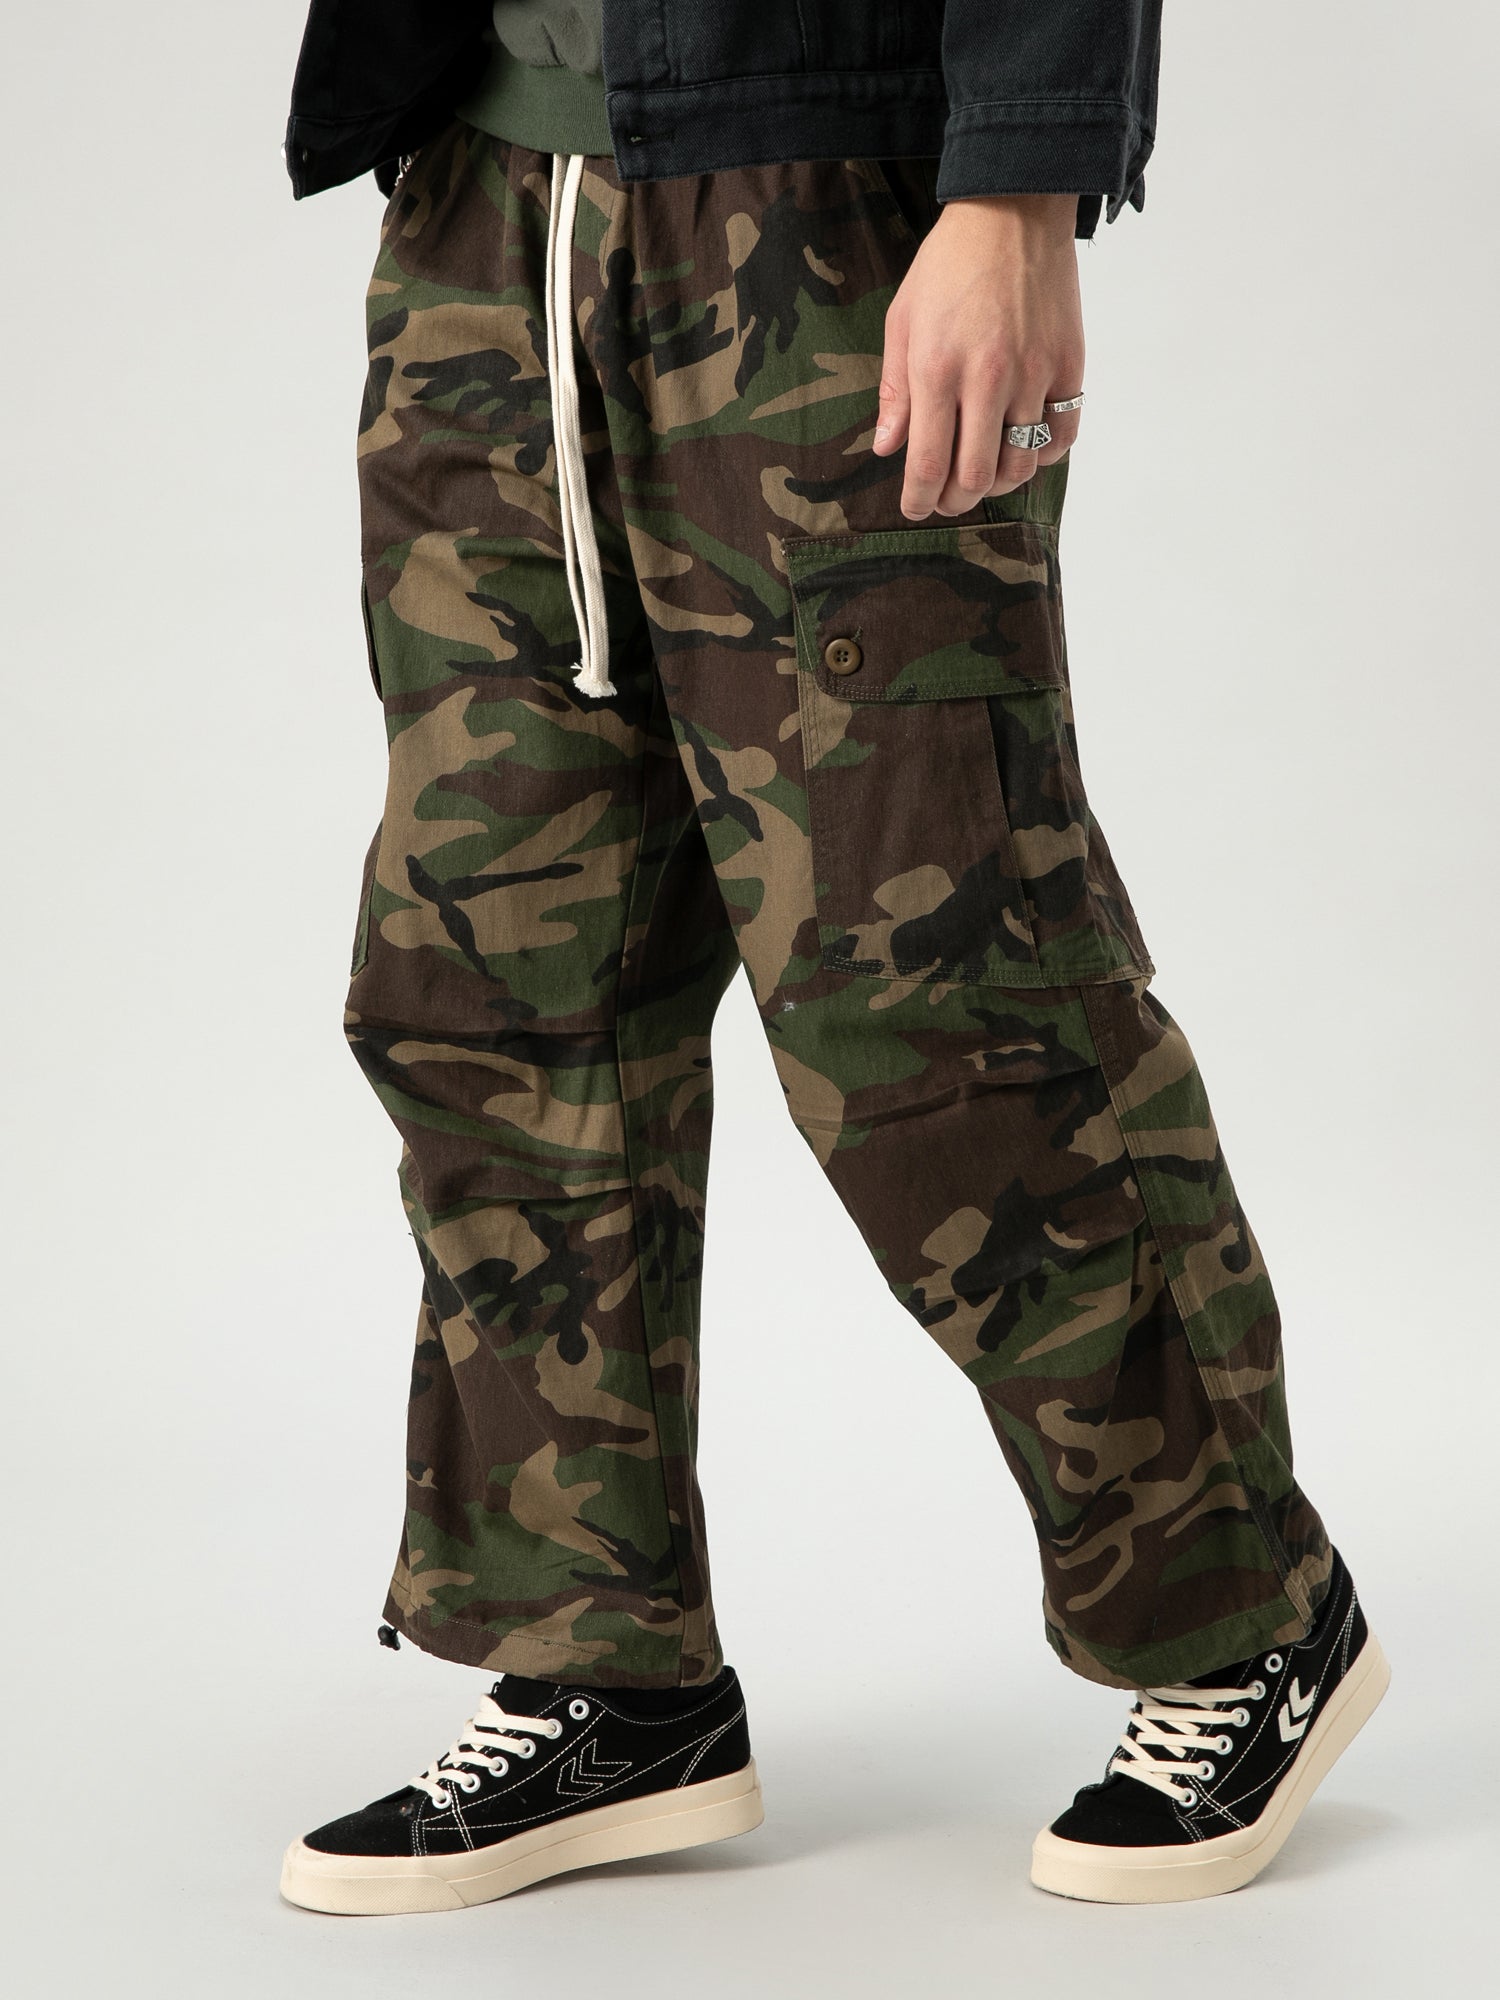 JUSTNOTAG Camouflage Casual Cargo Pants